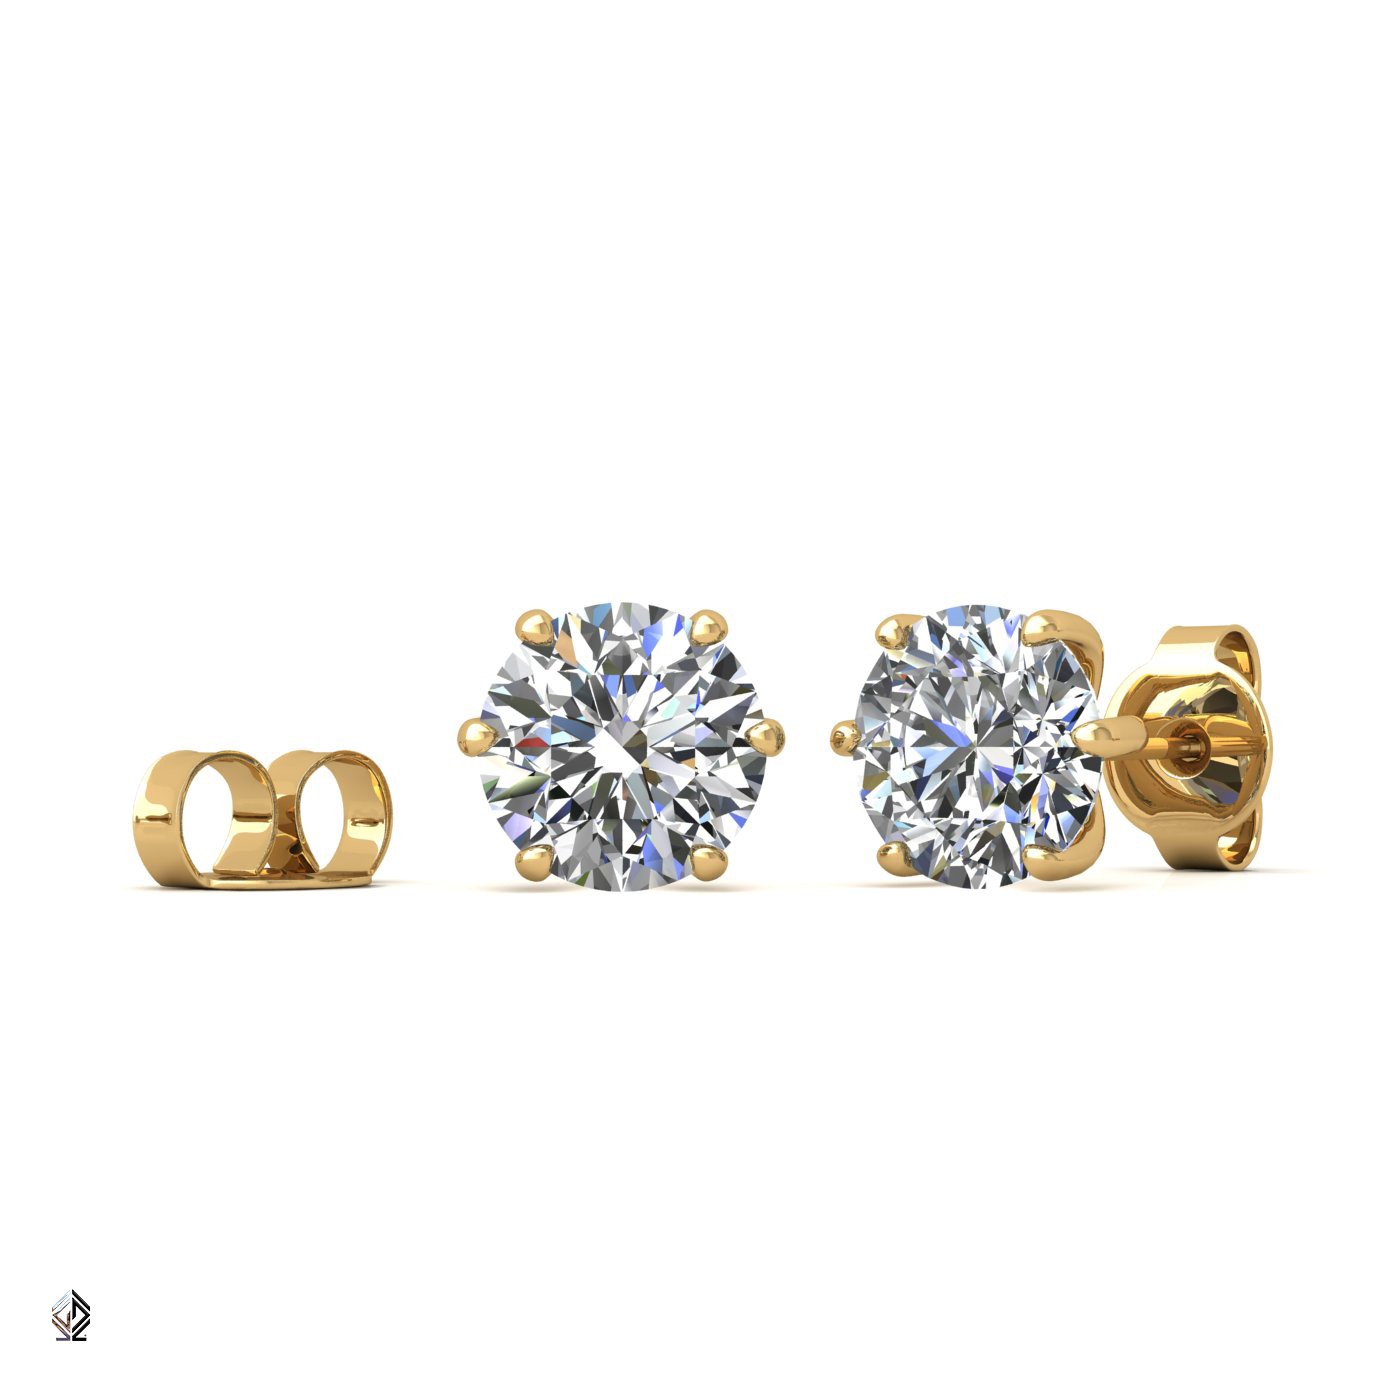 18k yellow gold 0,5 ct each (1,0 tcw) 6 prongs round shape diamond earrings Photos & images